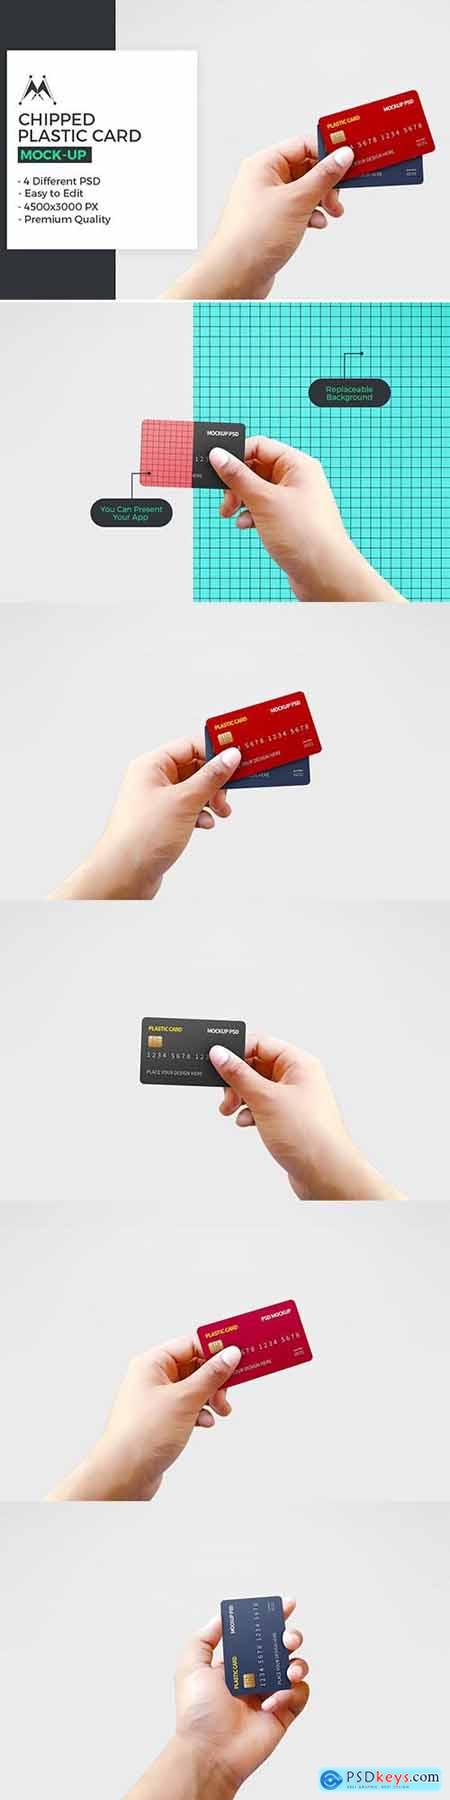 Chipped Plastic Card in Hand Mockup 5946311